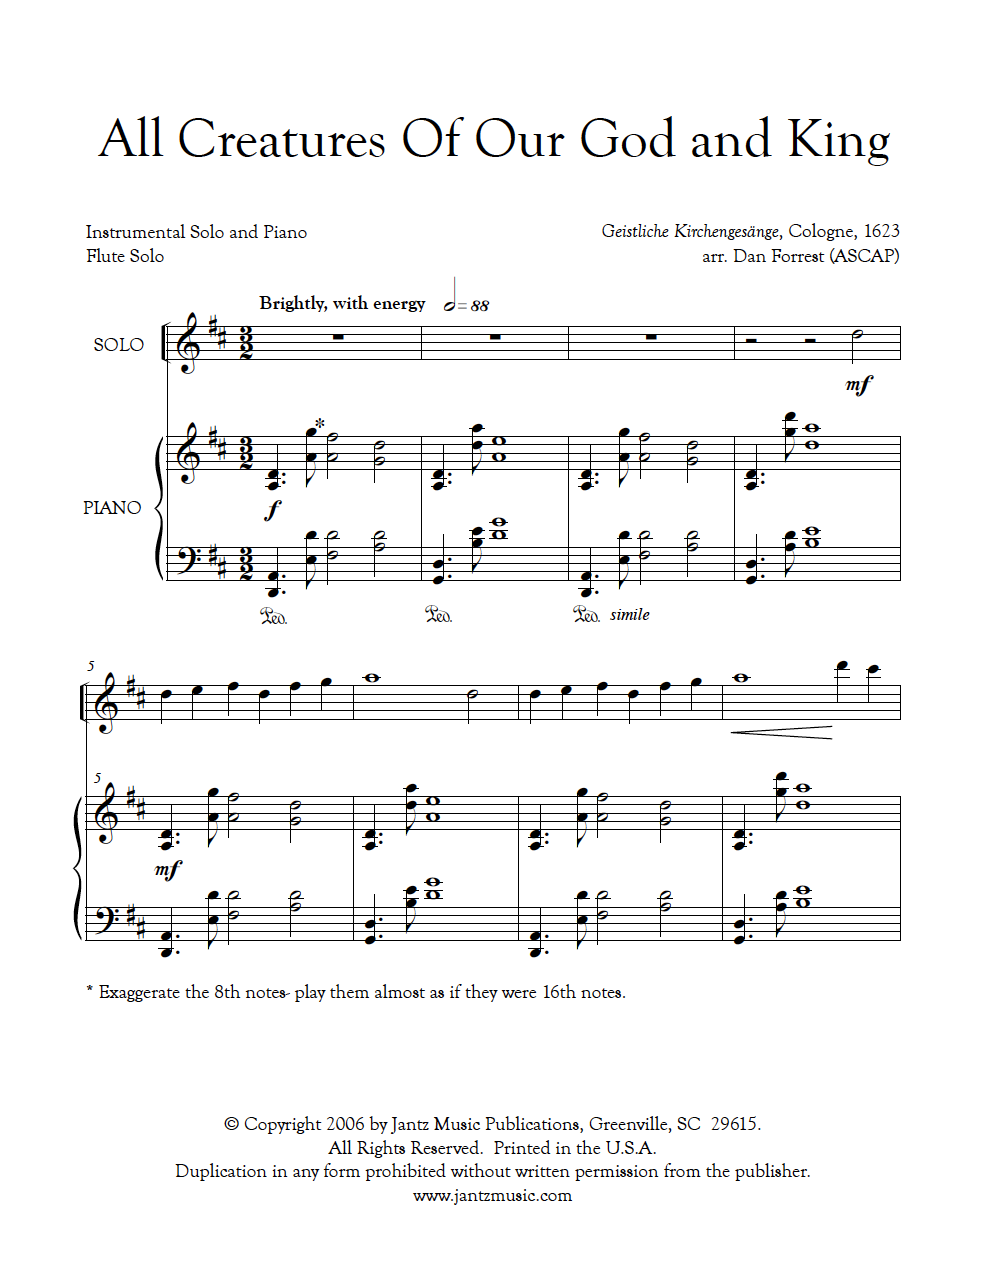 All Creatures of Our God and King - Flute Solo